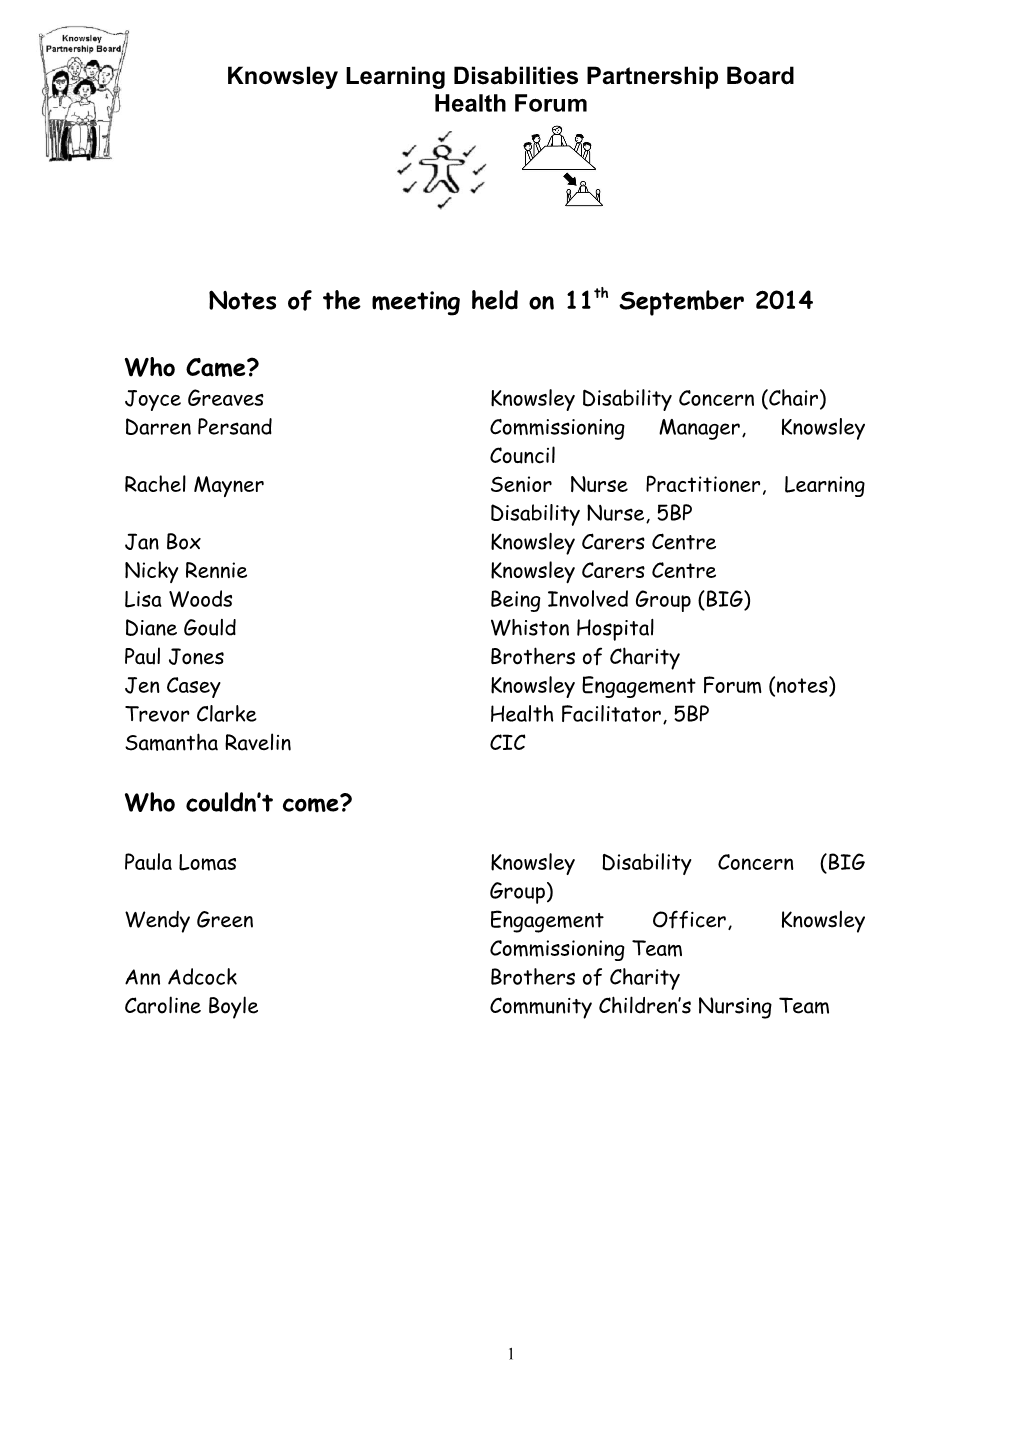 Notes of the Meeting Held on 11Thseptember 2014